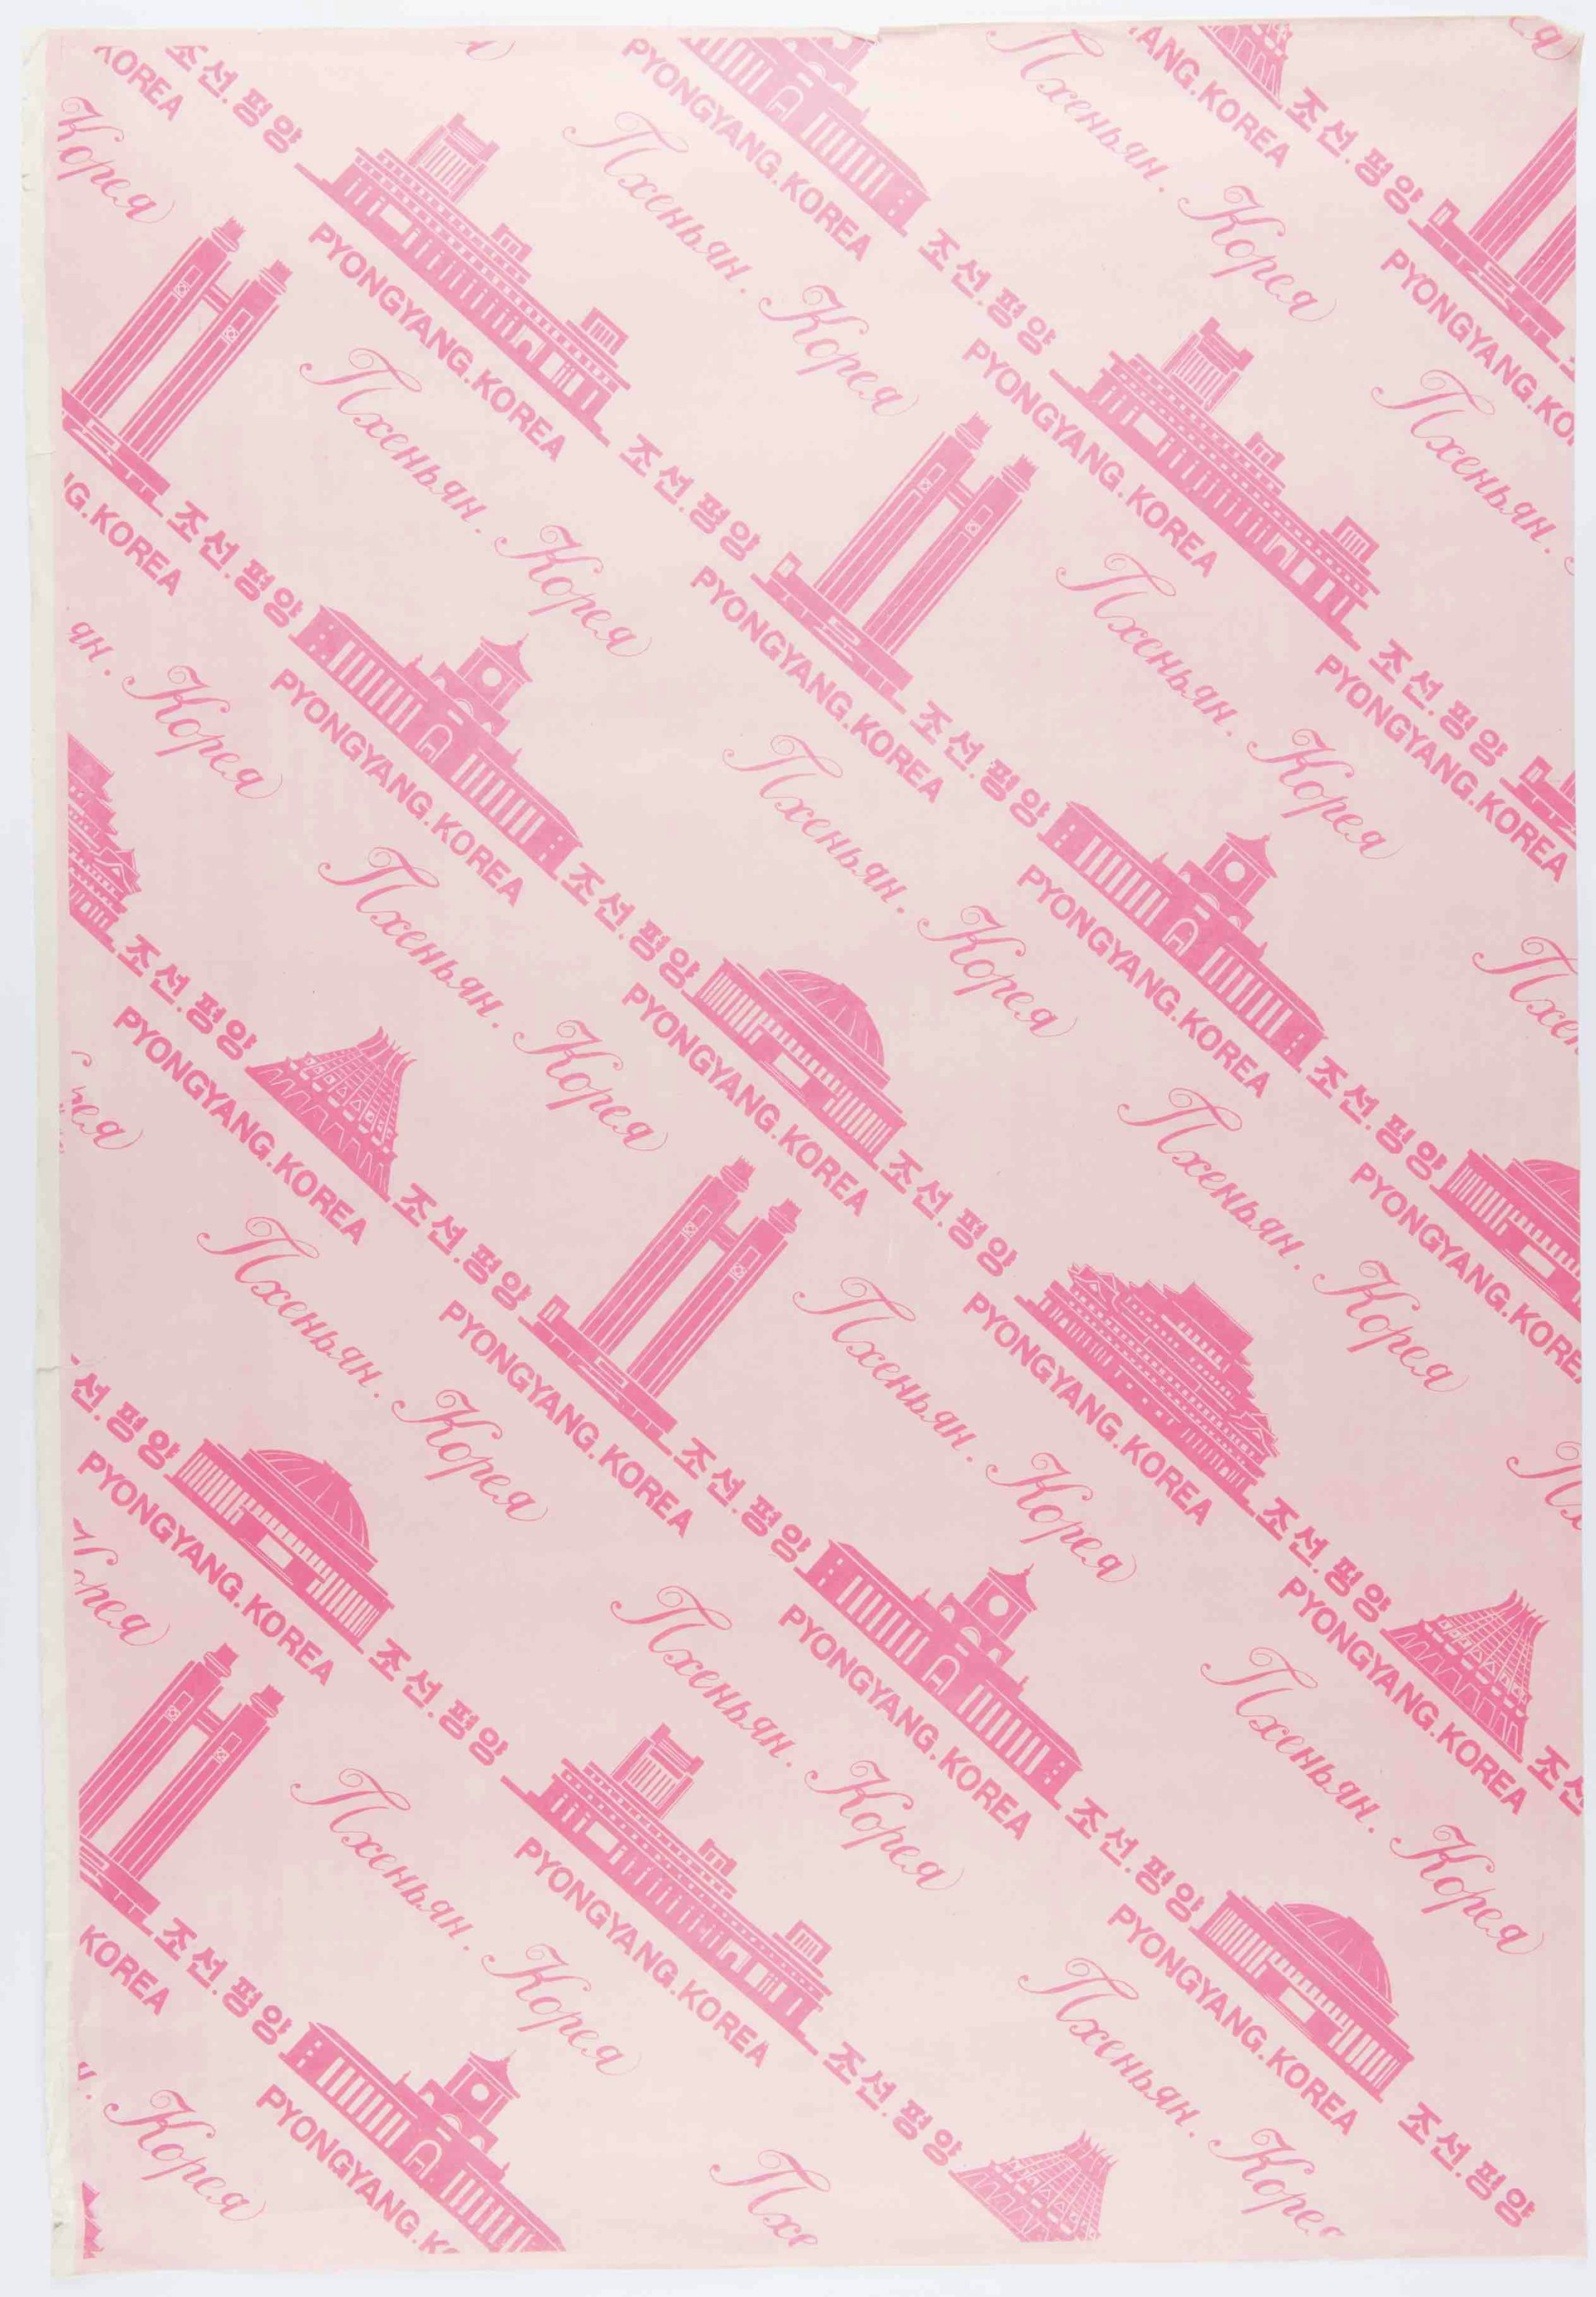 Wrapping paper, featuring some of Pyongyang’s architectural highlights – the Koryo Hotel, Railway Station, Ice Rink, Military Circus, Mansudae Art Theatre and the Grand People’s Study House.